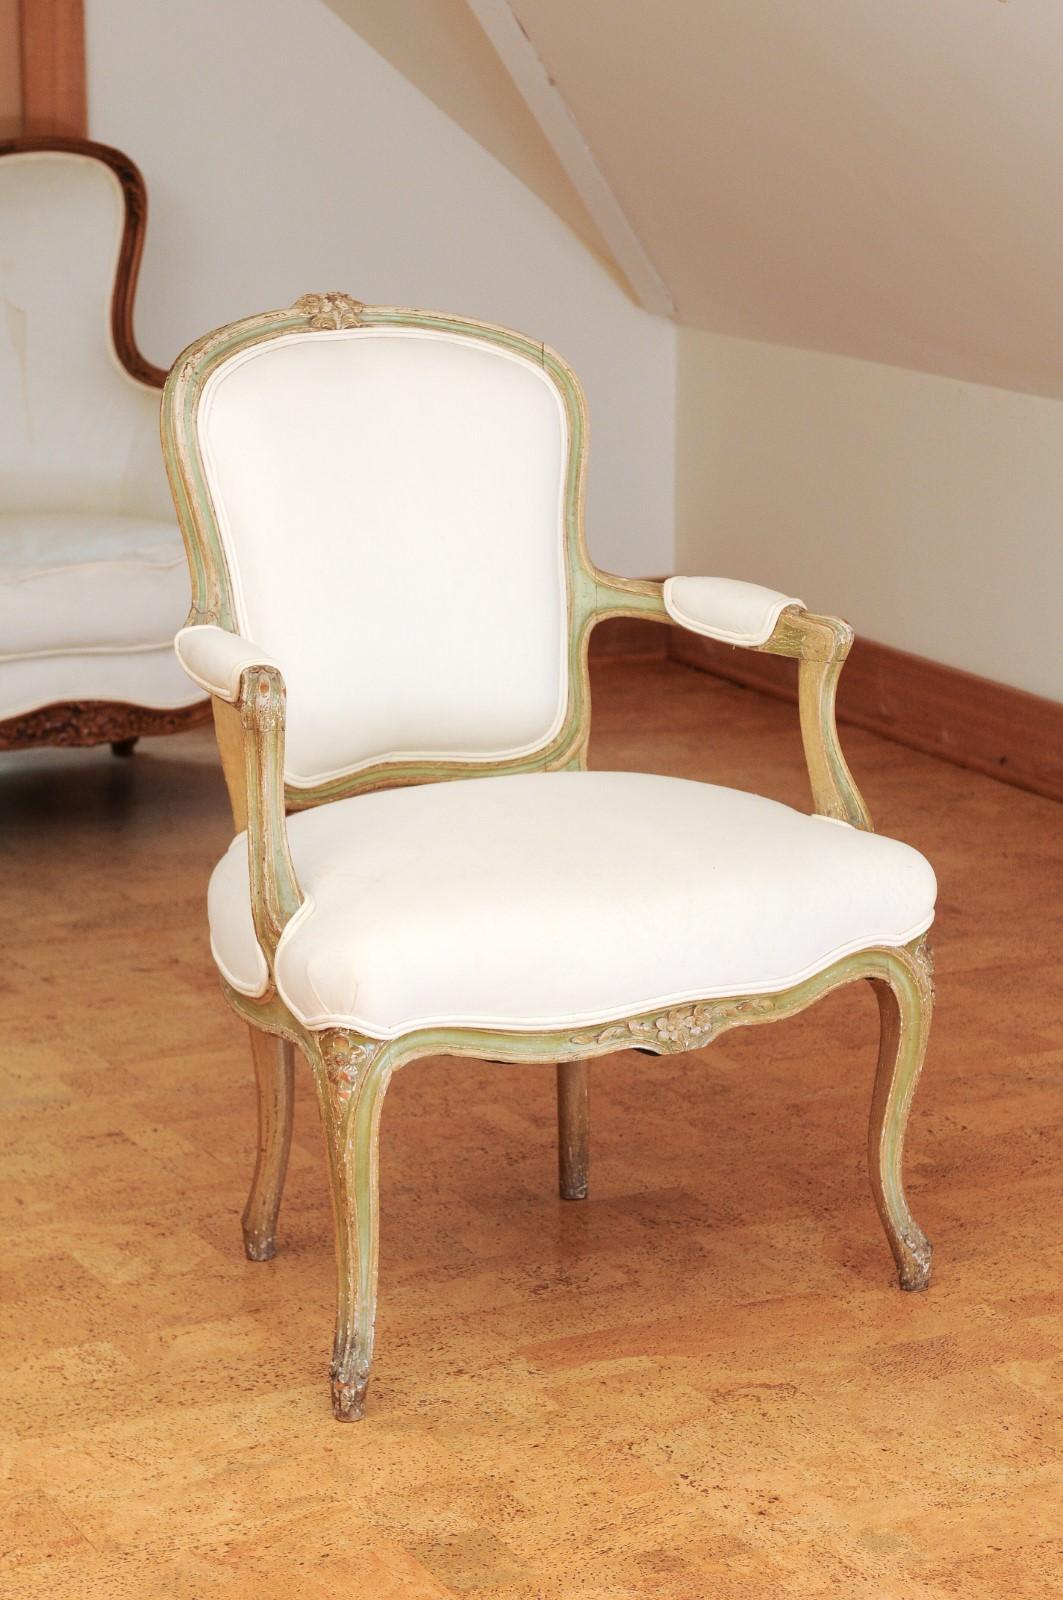 A French Louis XV style fauteuil from the 19th century, with carved flowers, cabriole legs and upholstery. Created in France during the 19th century, this Louis XV style armchair features a curving back, adorned with delicately carved flowers on the